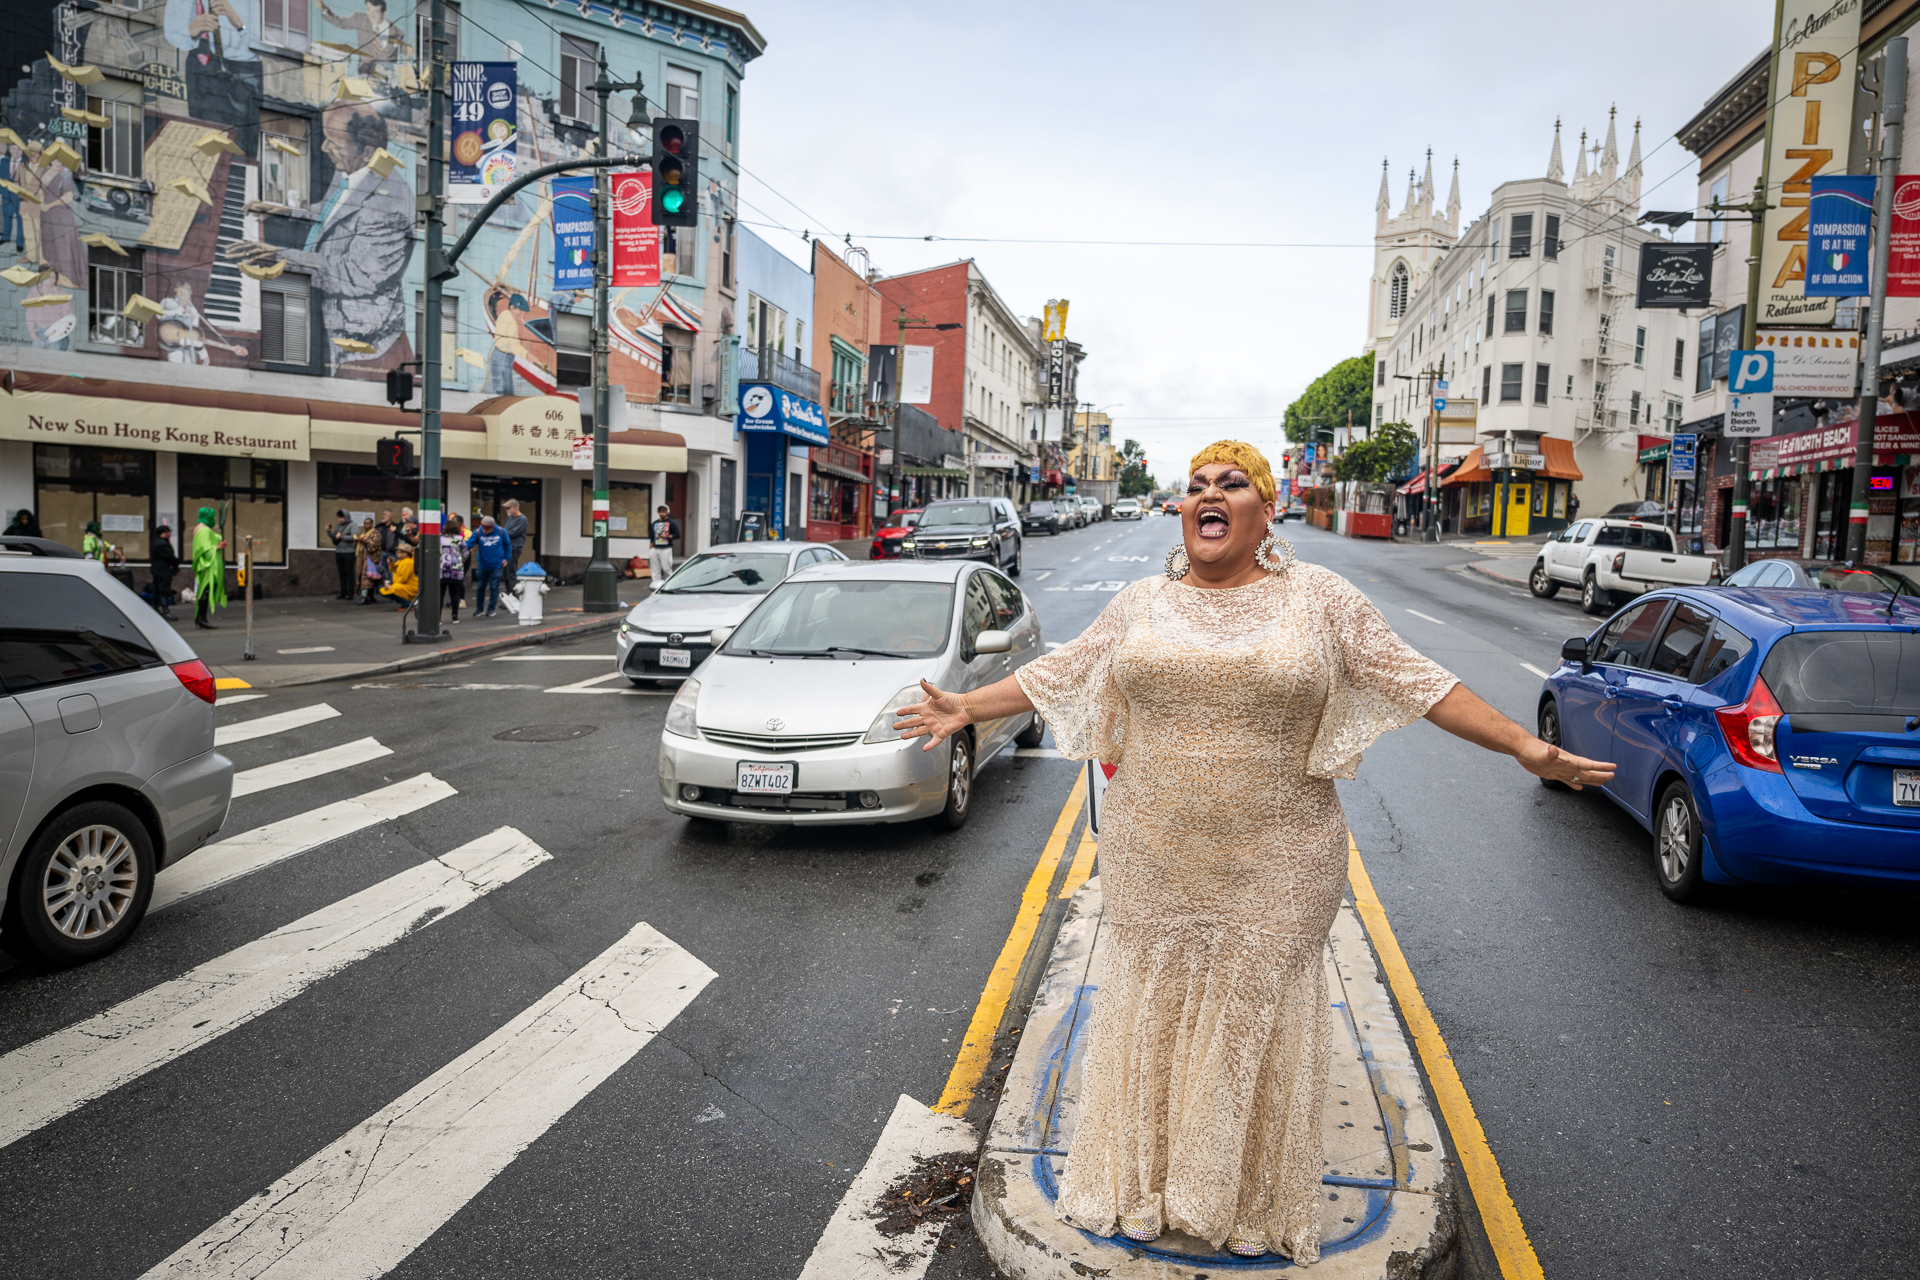 A drag performer in a white dress singing on a traffic island as cars go by.